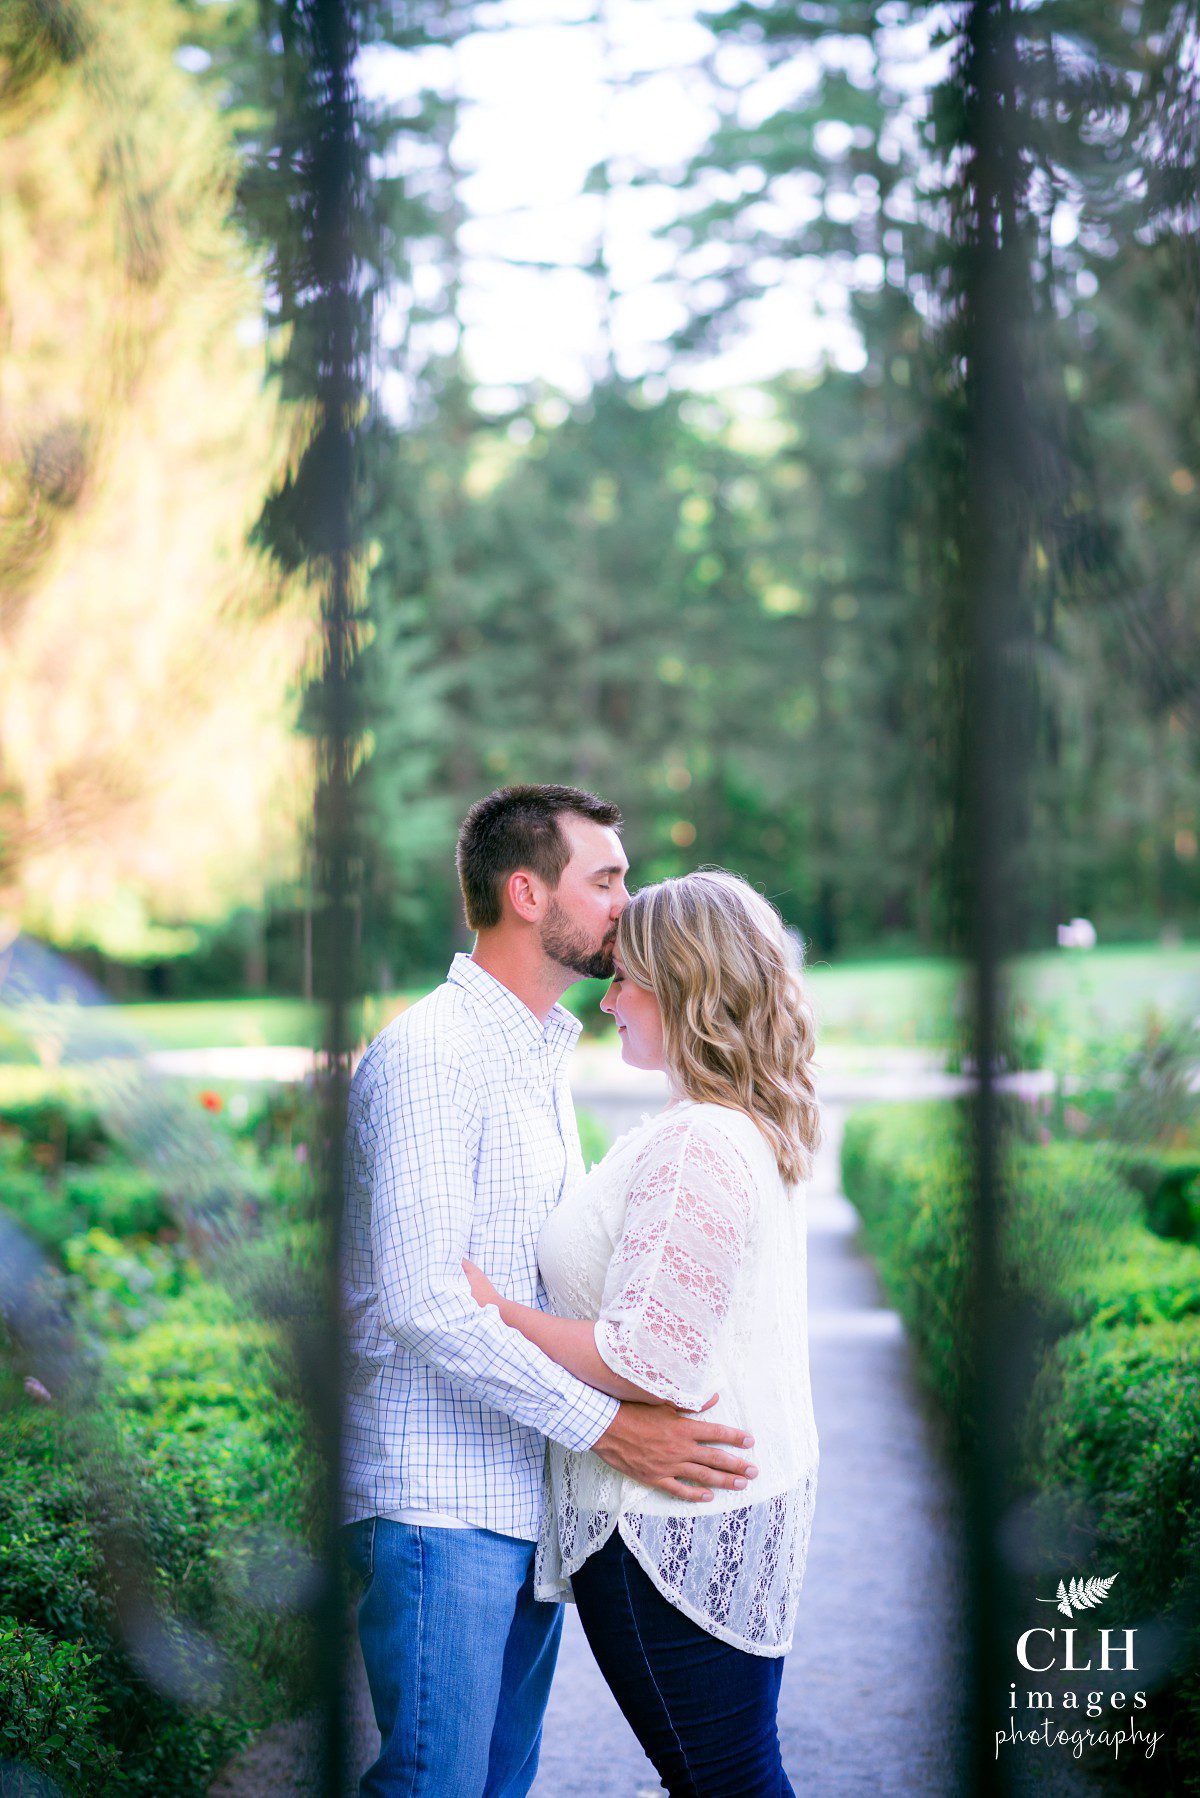 CLH images Photography - Engagement Photographer - Engagement Photos - Saratoga NY Photography - Yaddo Gardens - Erica and Jeff (10)